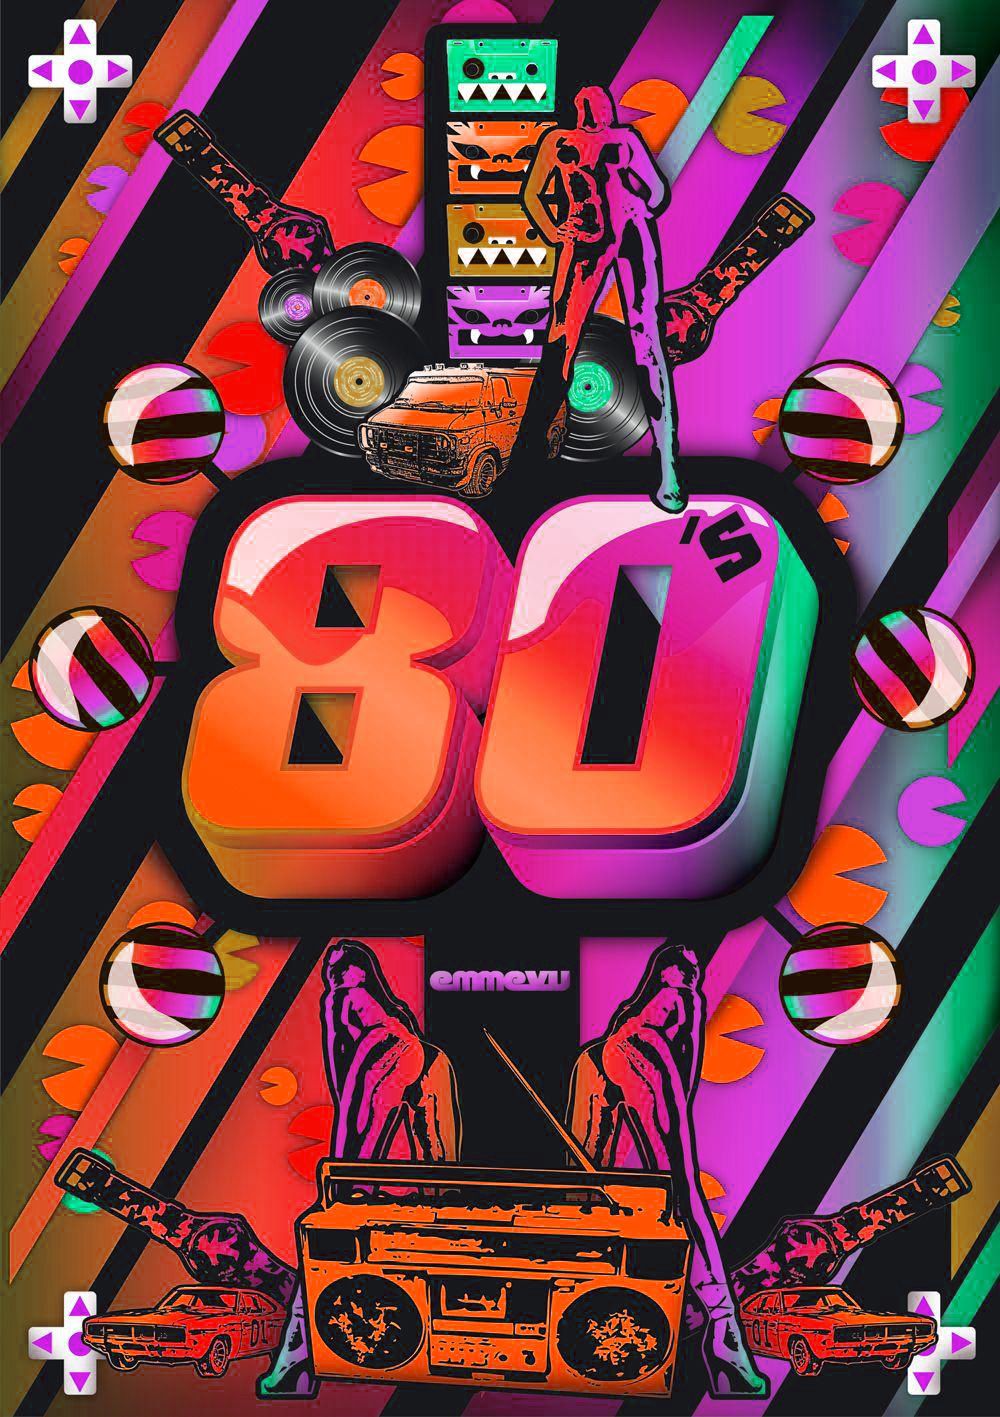 A poster with the number 80 on it - 80s